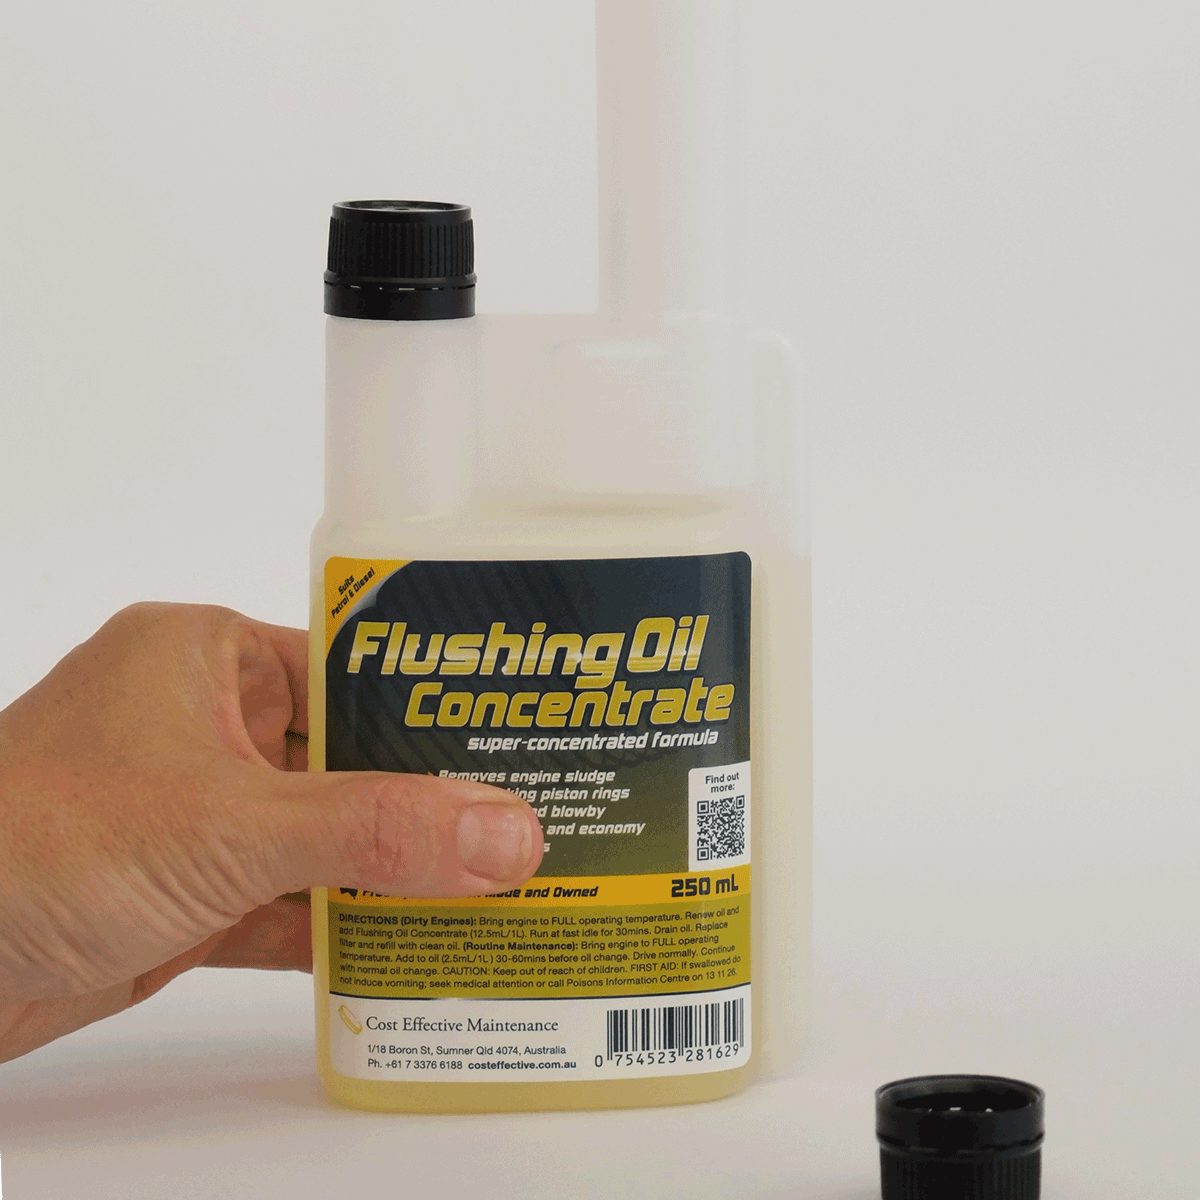 Flushing-Oil-Concentrate-250ml-3-squeeze